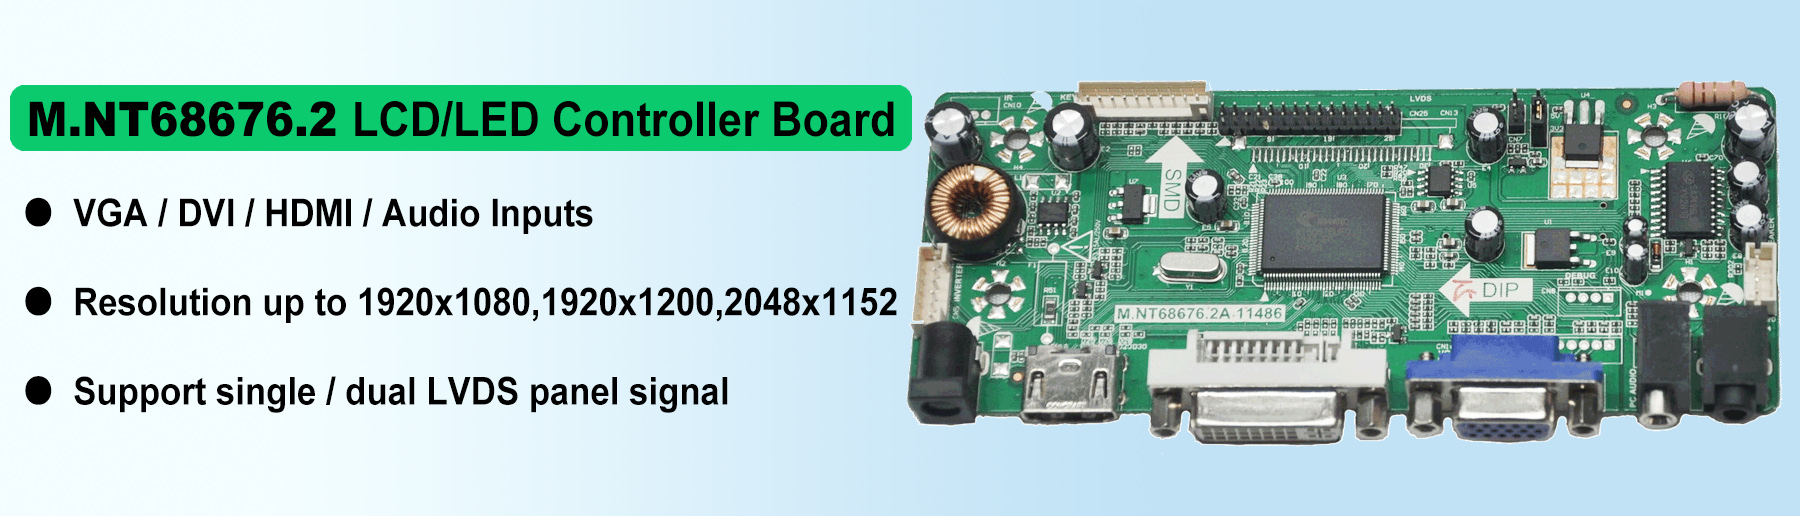 M.NT68676.2A LCD Controller Board with VGA DVI HDMI Inputs